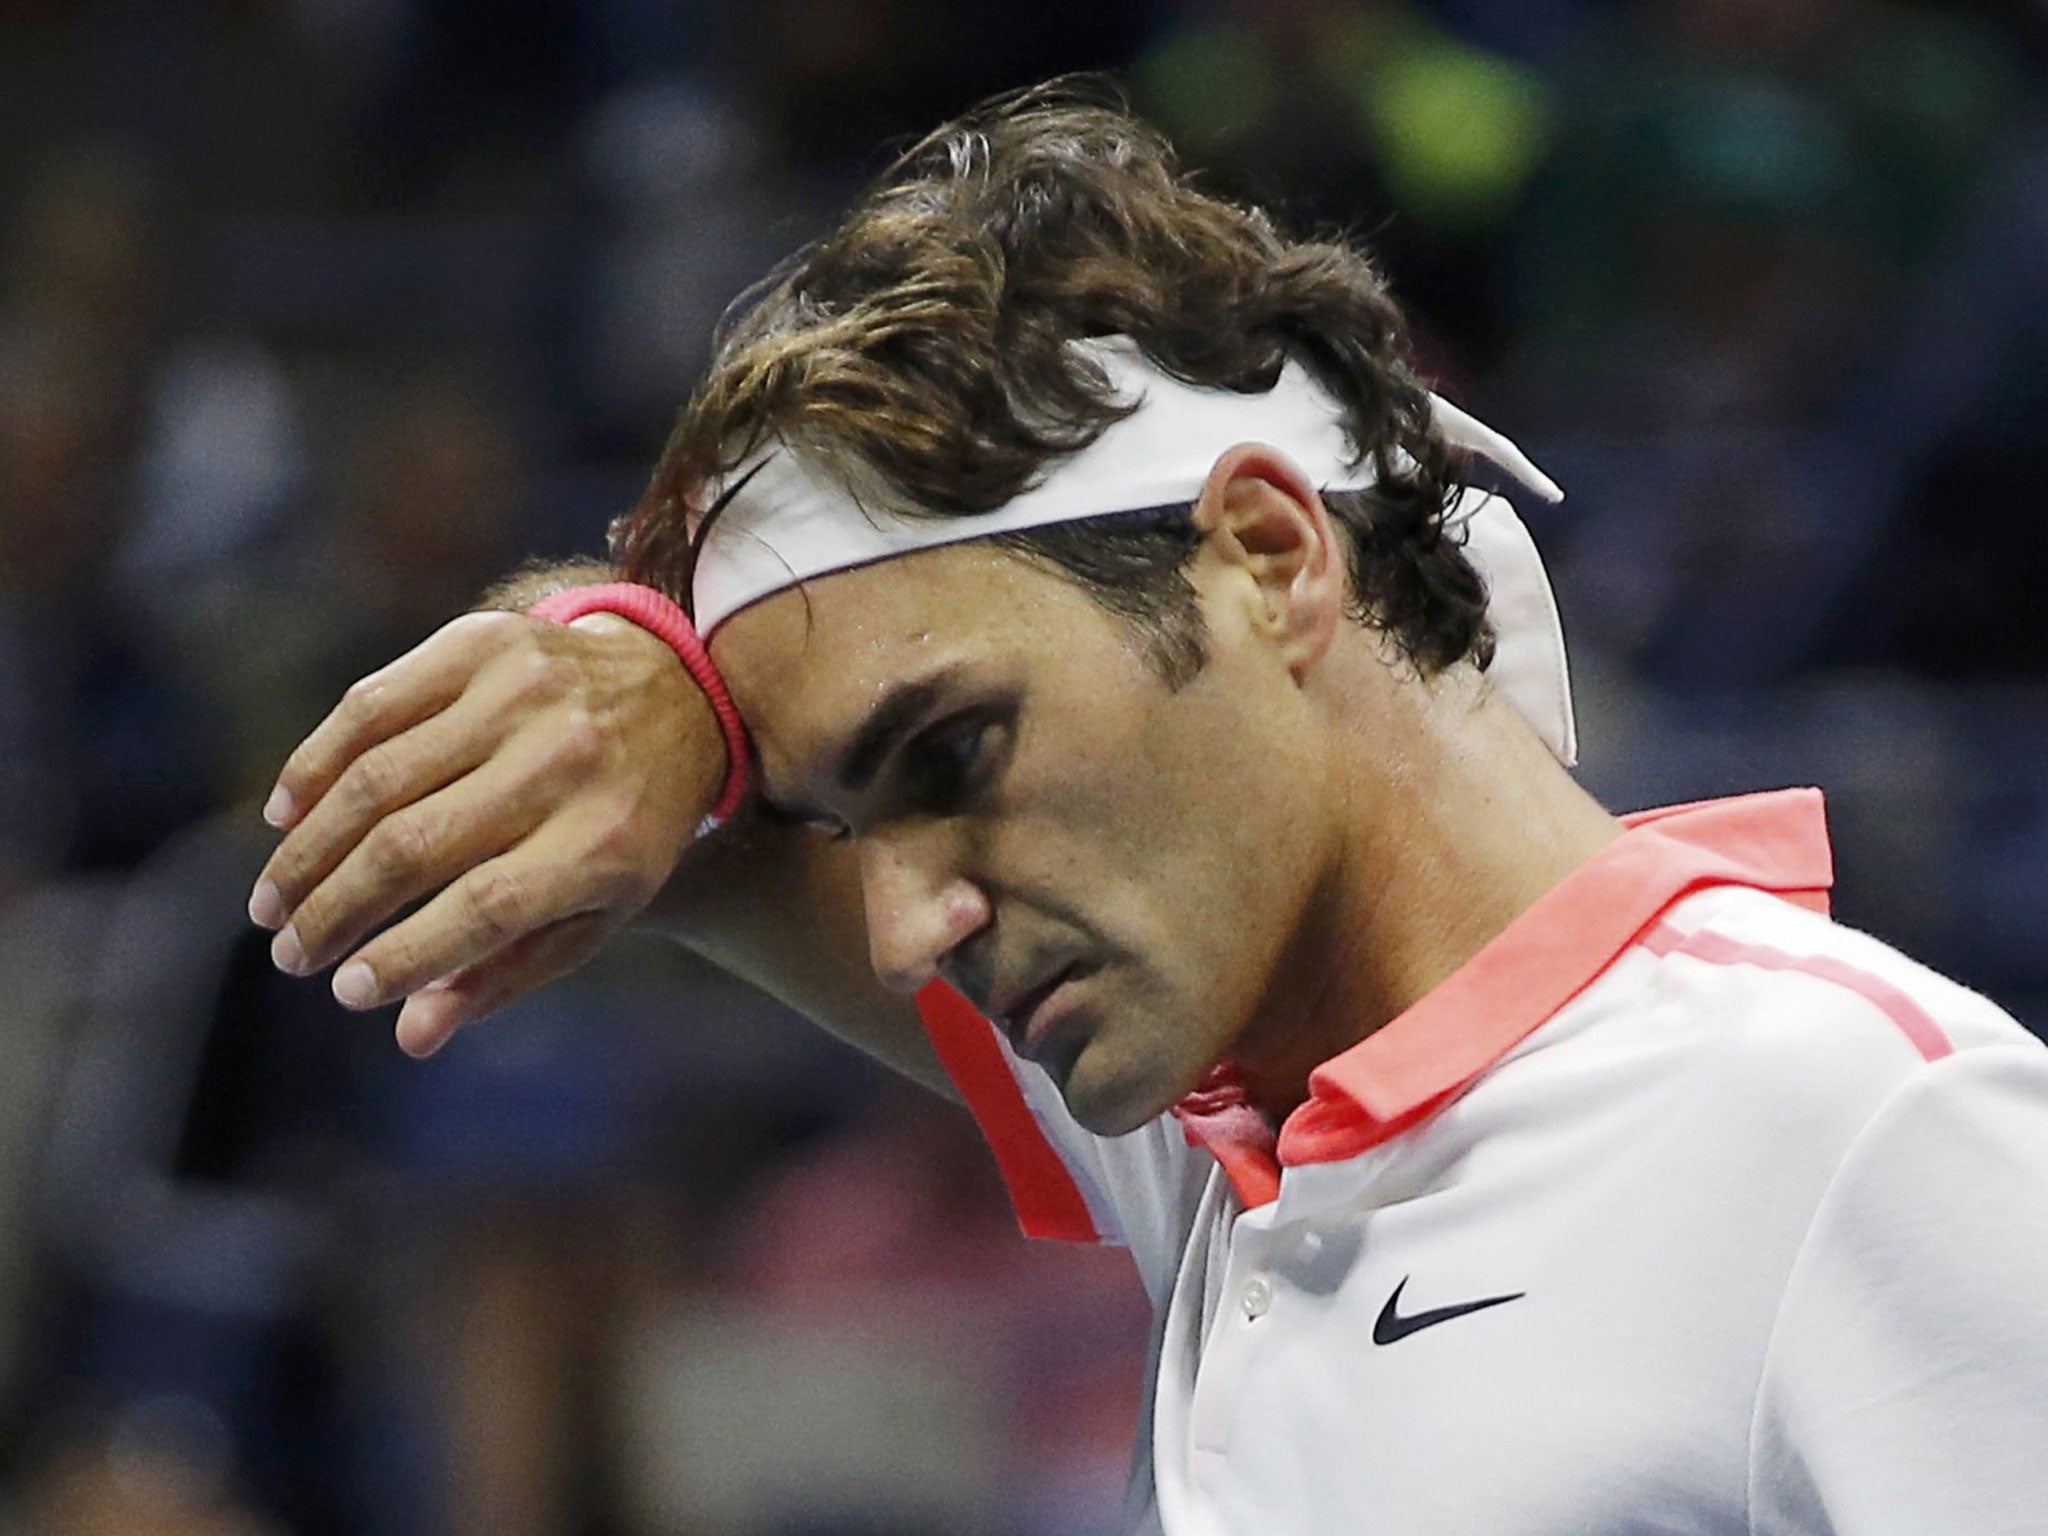 Roger Federer had been in extraordinary form, but was denied his 18th Grand Slam title